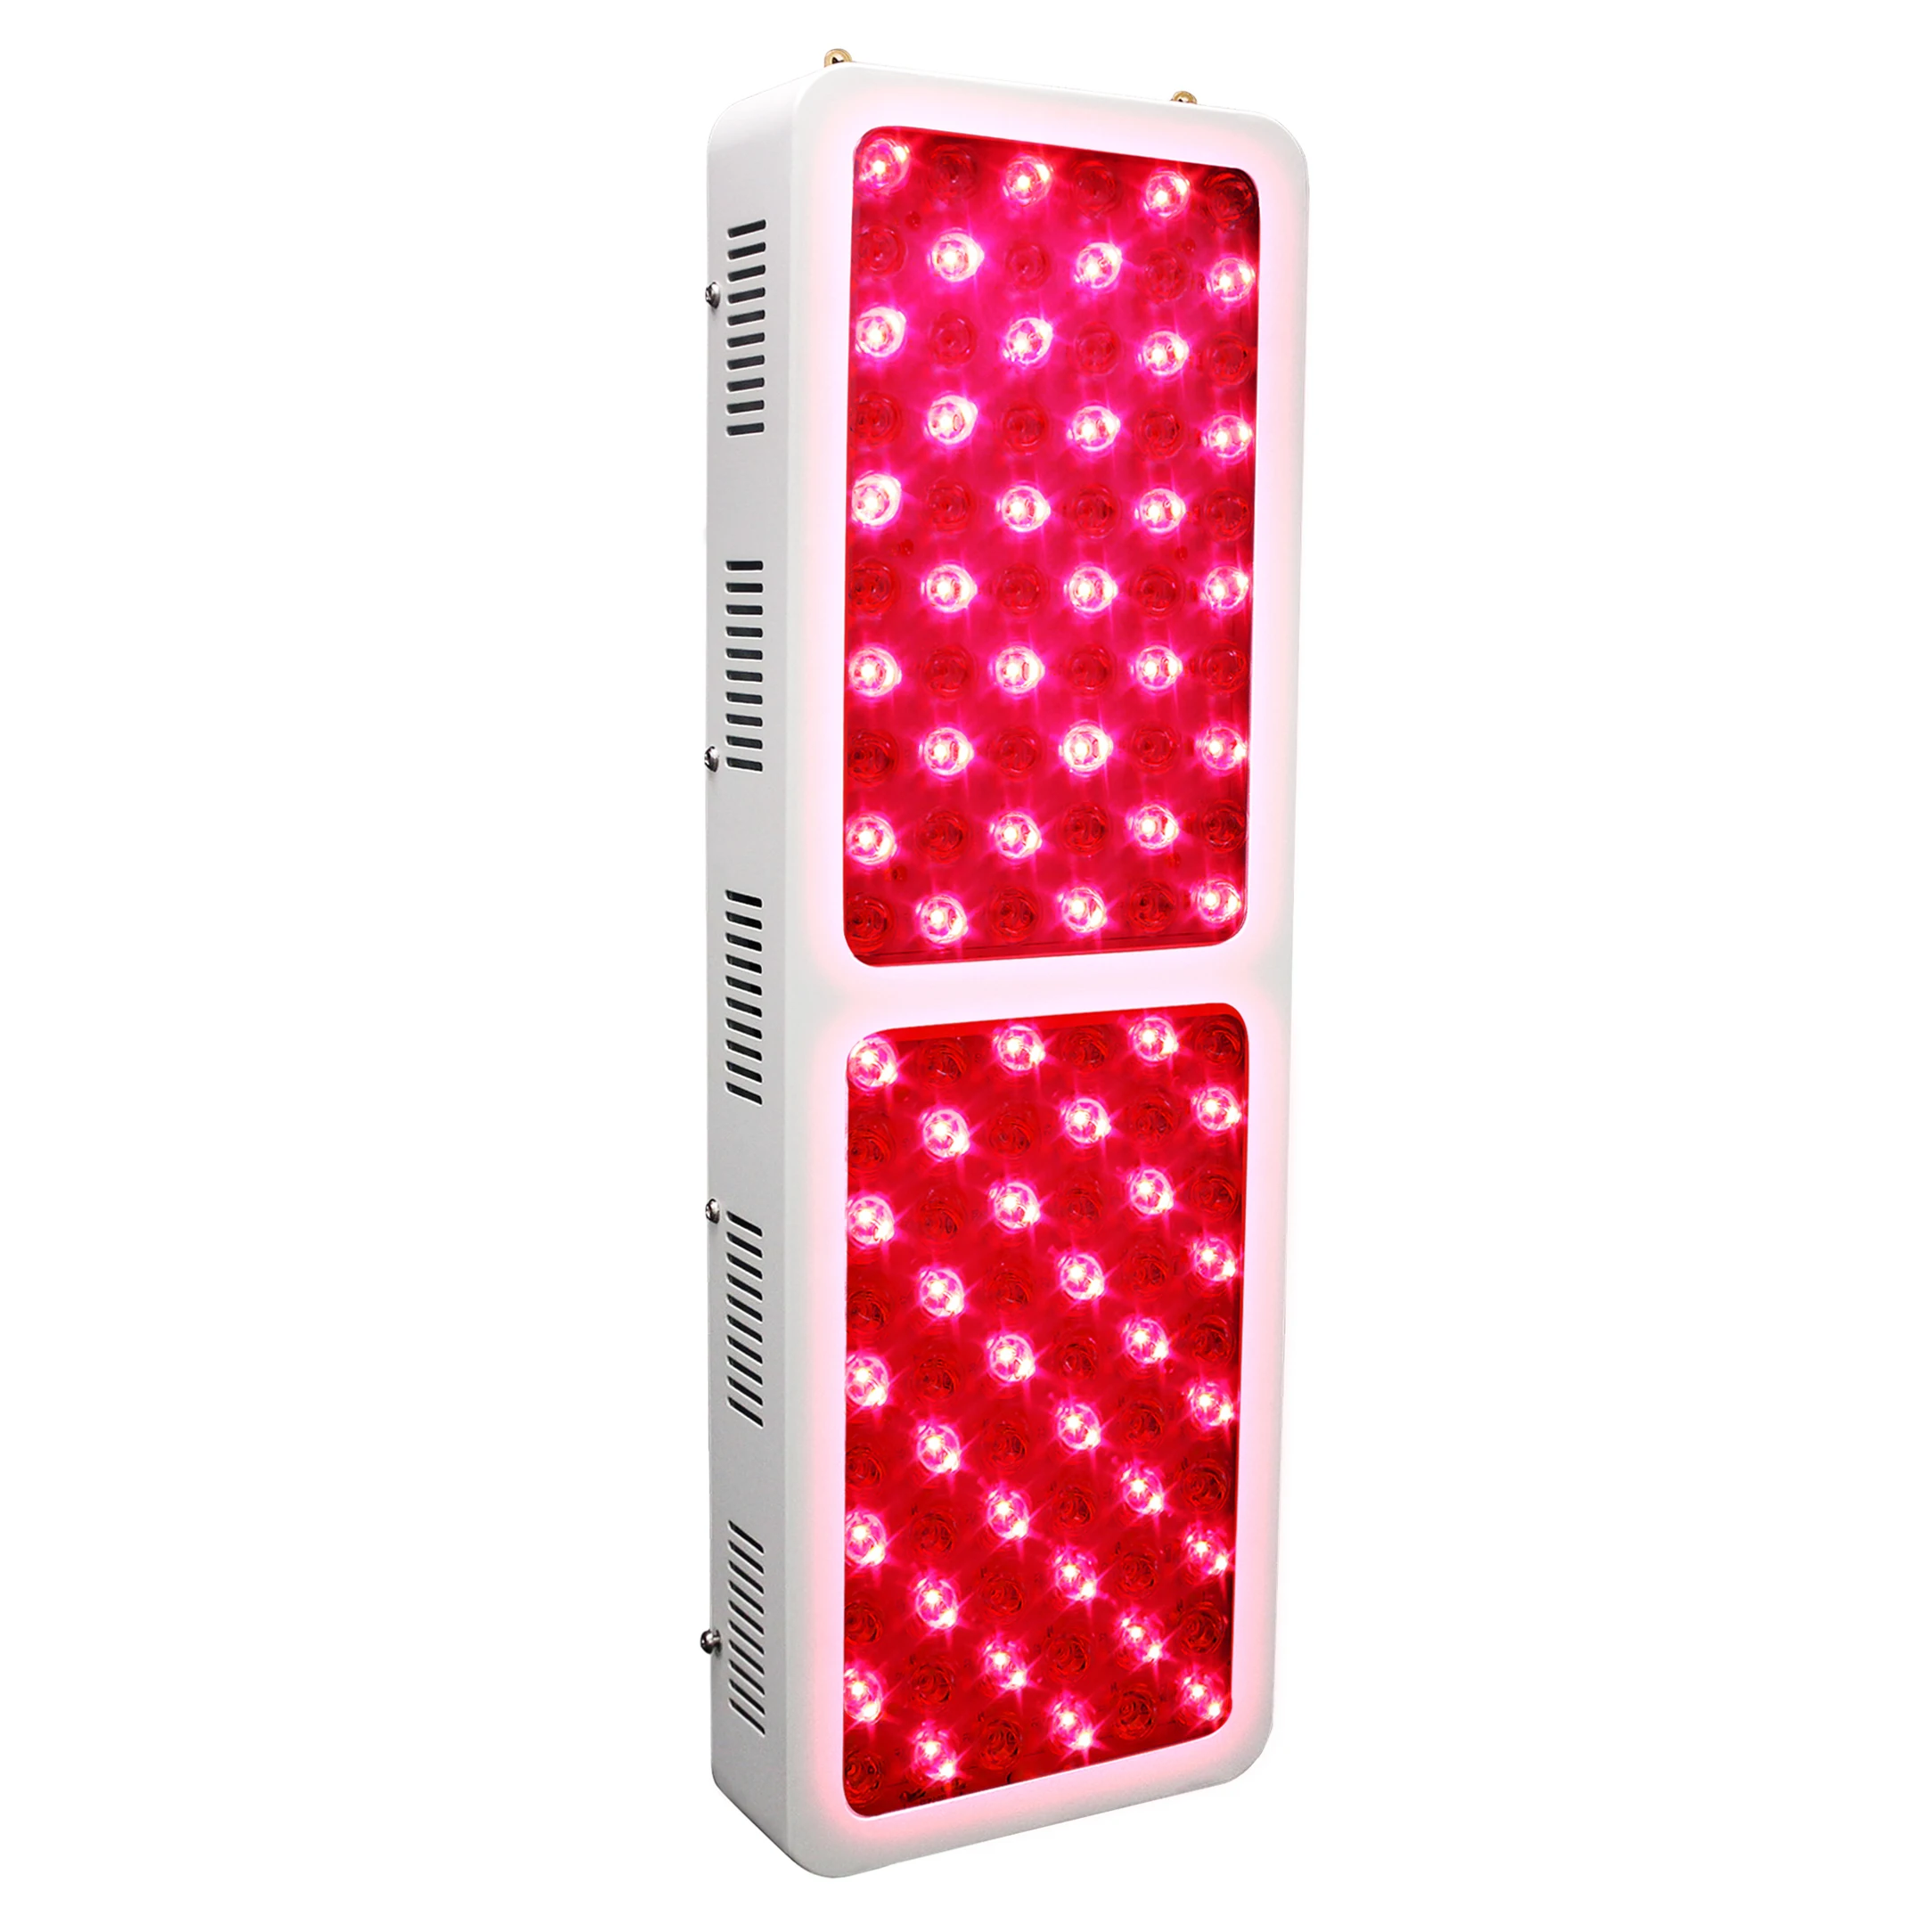 

660nm 850nm 1:1 Red Infrared 600W PDT Machine Health Beauty LED Red Light Therapy Lamps, N/a